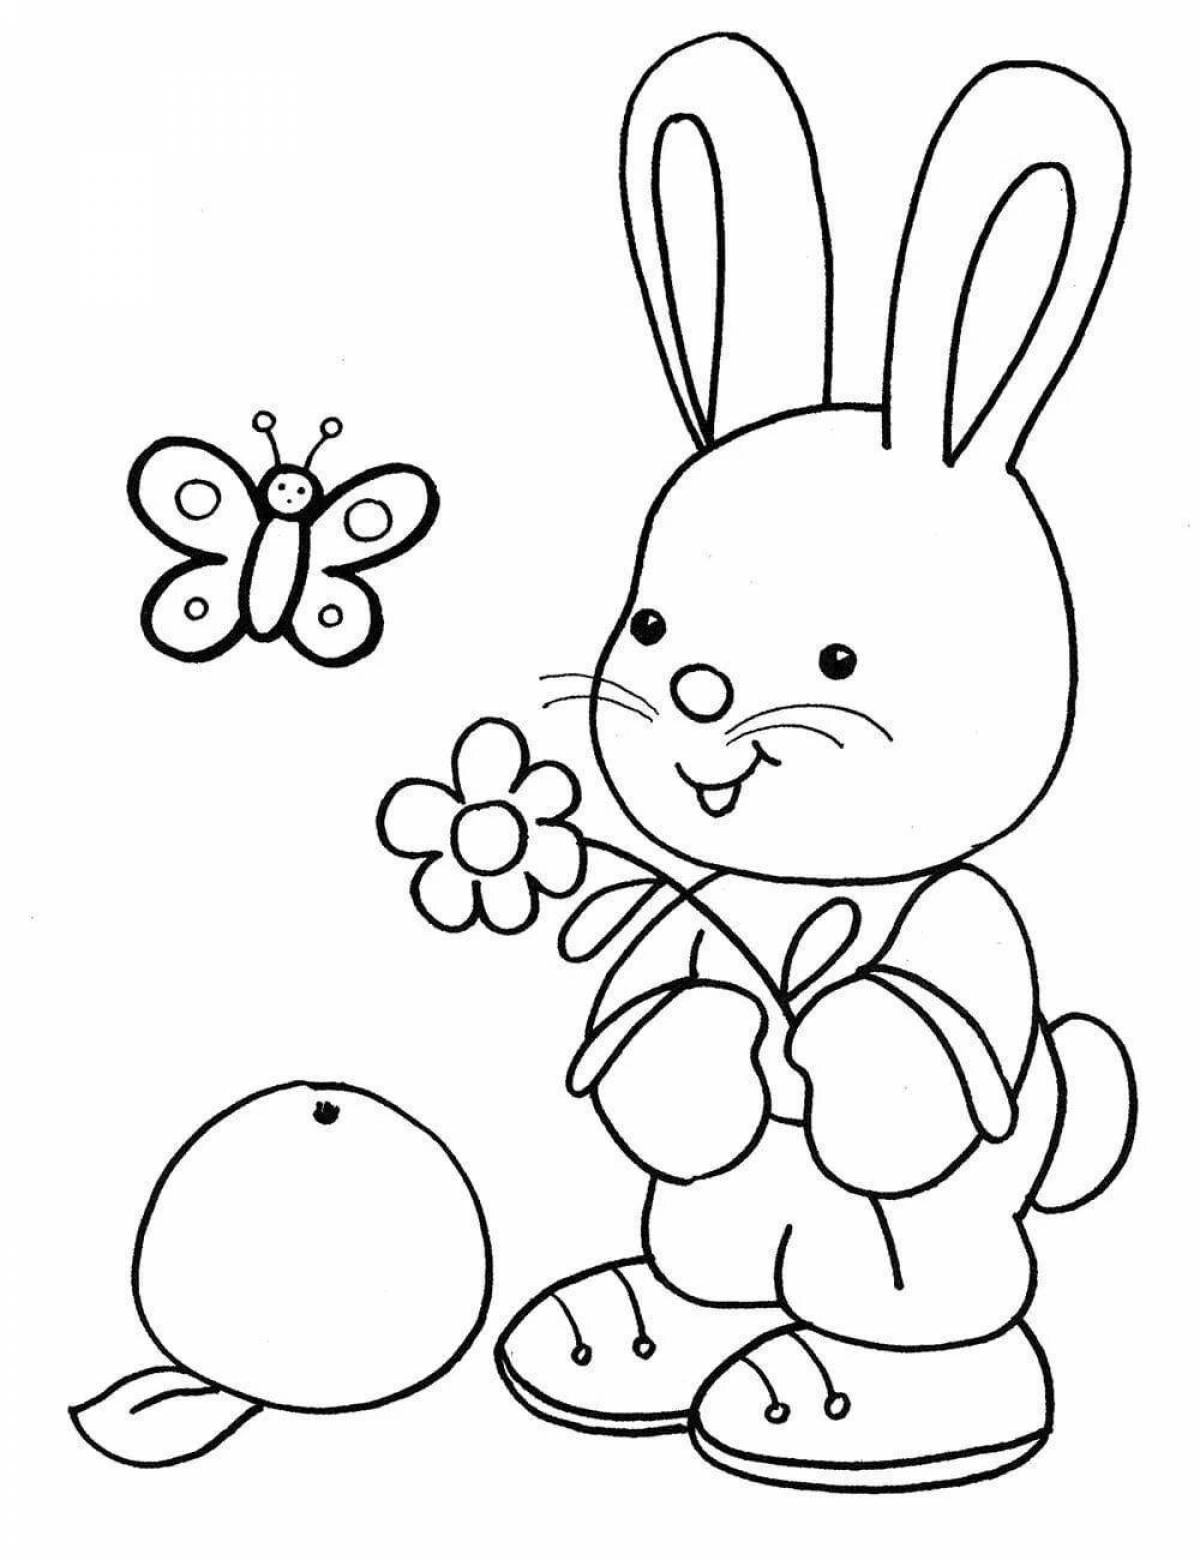 Creative coloring book for 3 year old girls